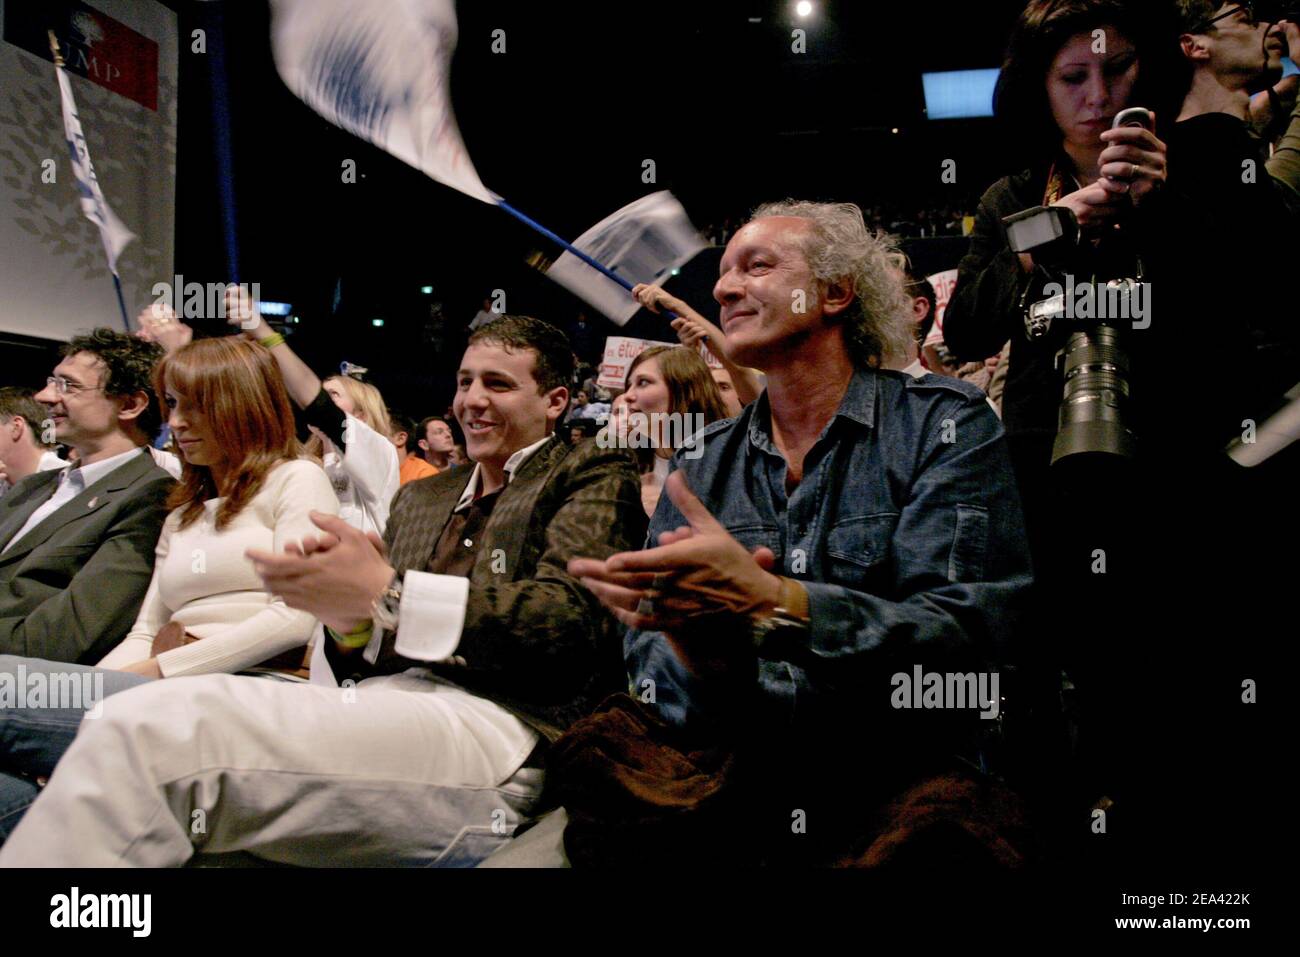 French singers Faudel and Didier Barbelivien attend a meeting of UMP party for the 'Yes' vote for the upcoming European Constitution referendum vote next May 29, at the Palais des Sports, in Paris, France, on May 12, 2005. Photo by Mousse/ABACA. Stock Photo